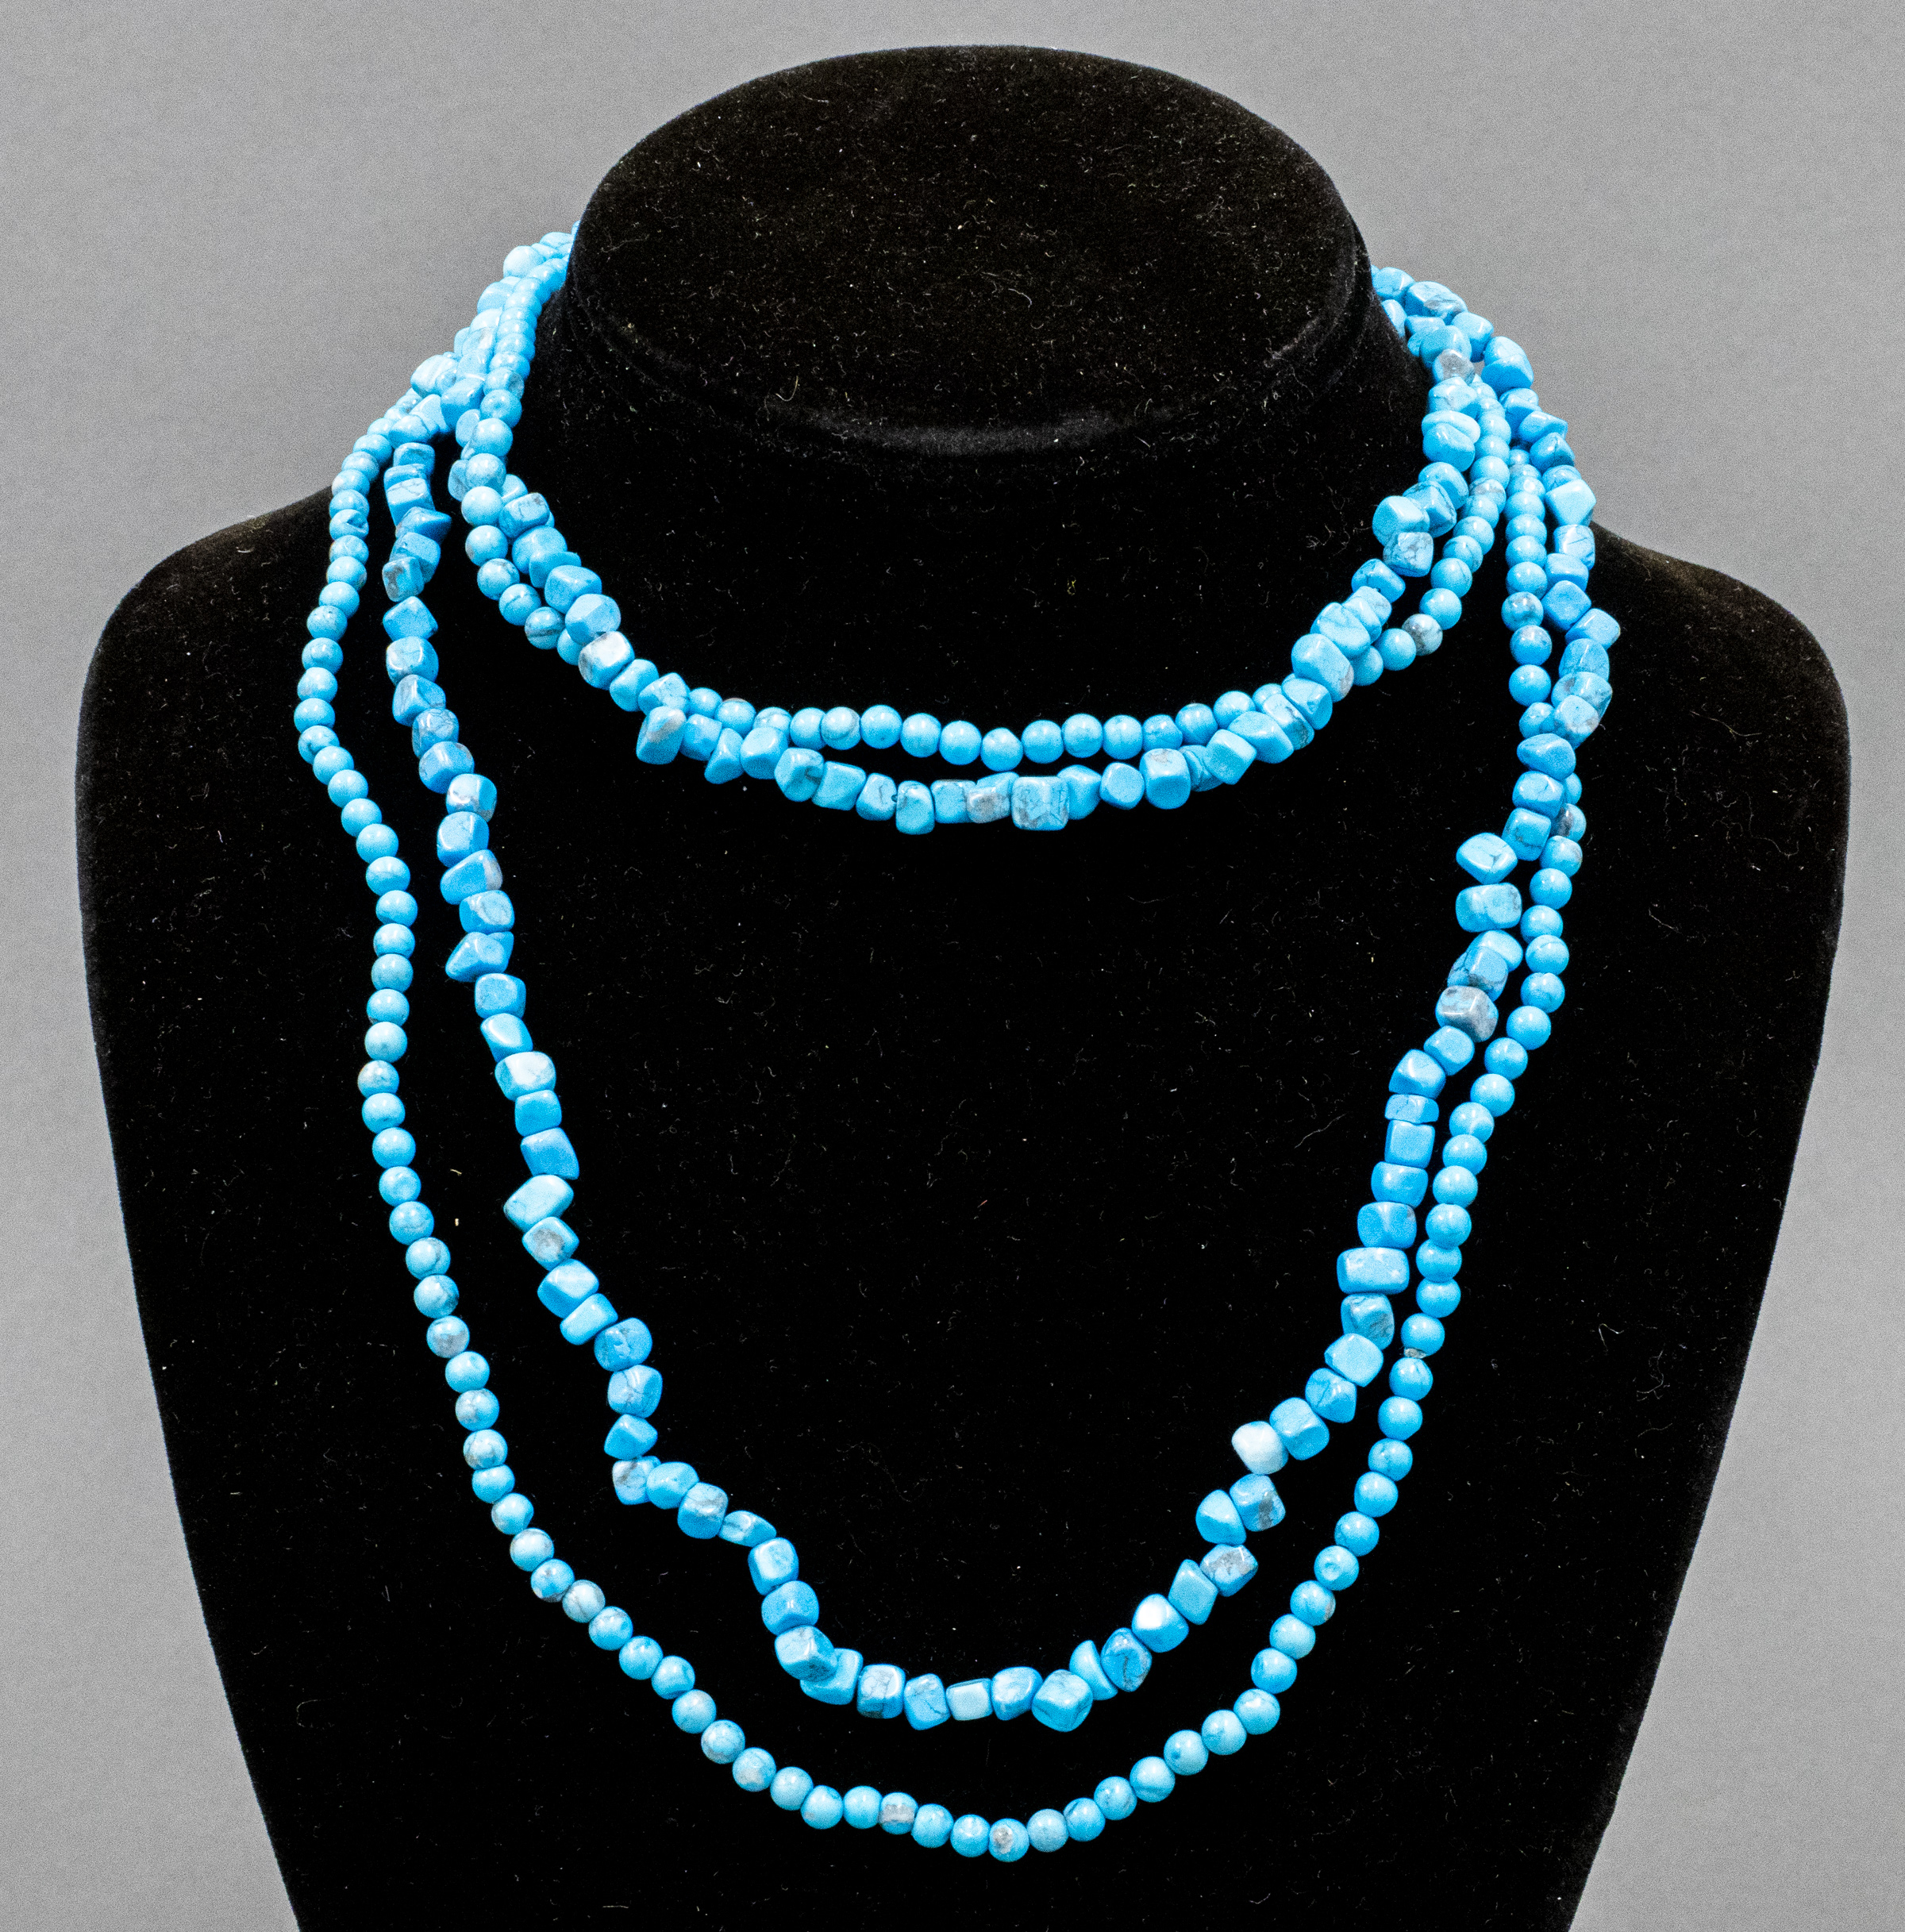 AMERICAN INDIAN STYLE TURQUOISE